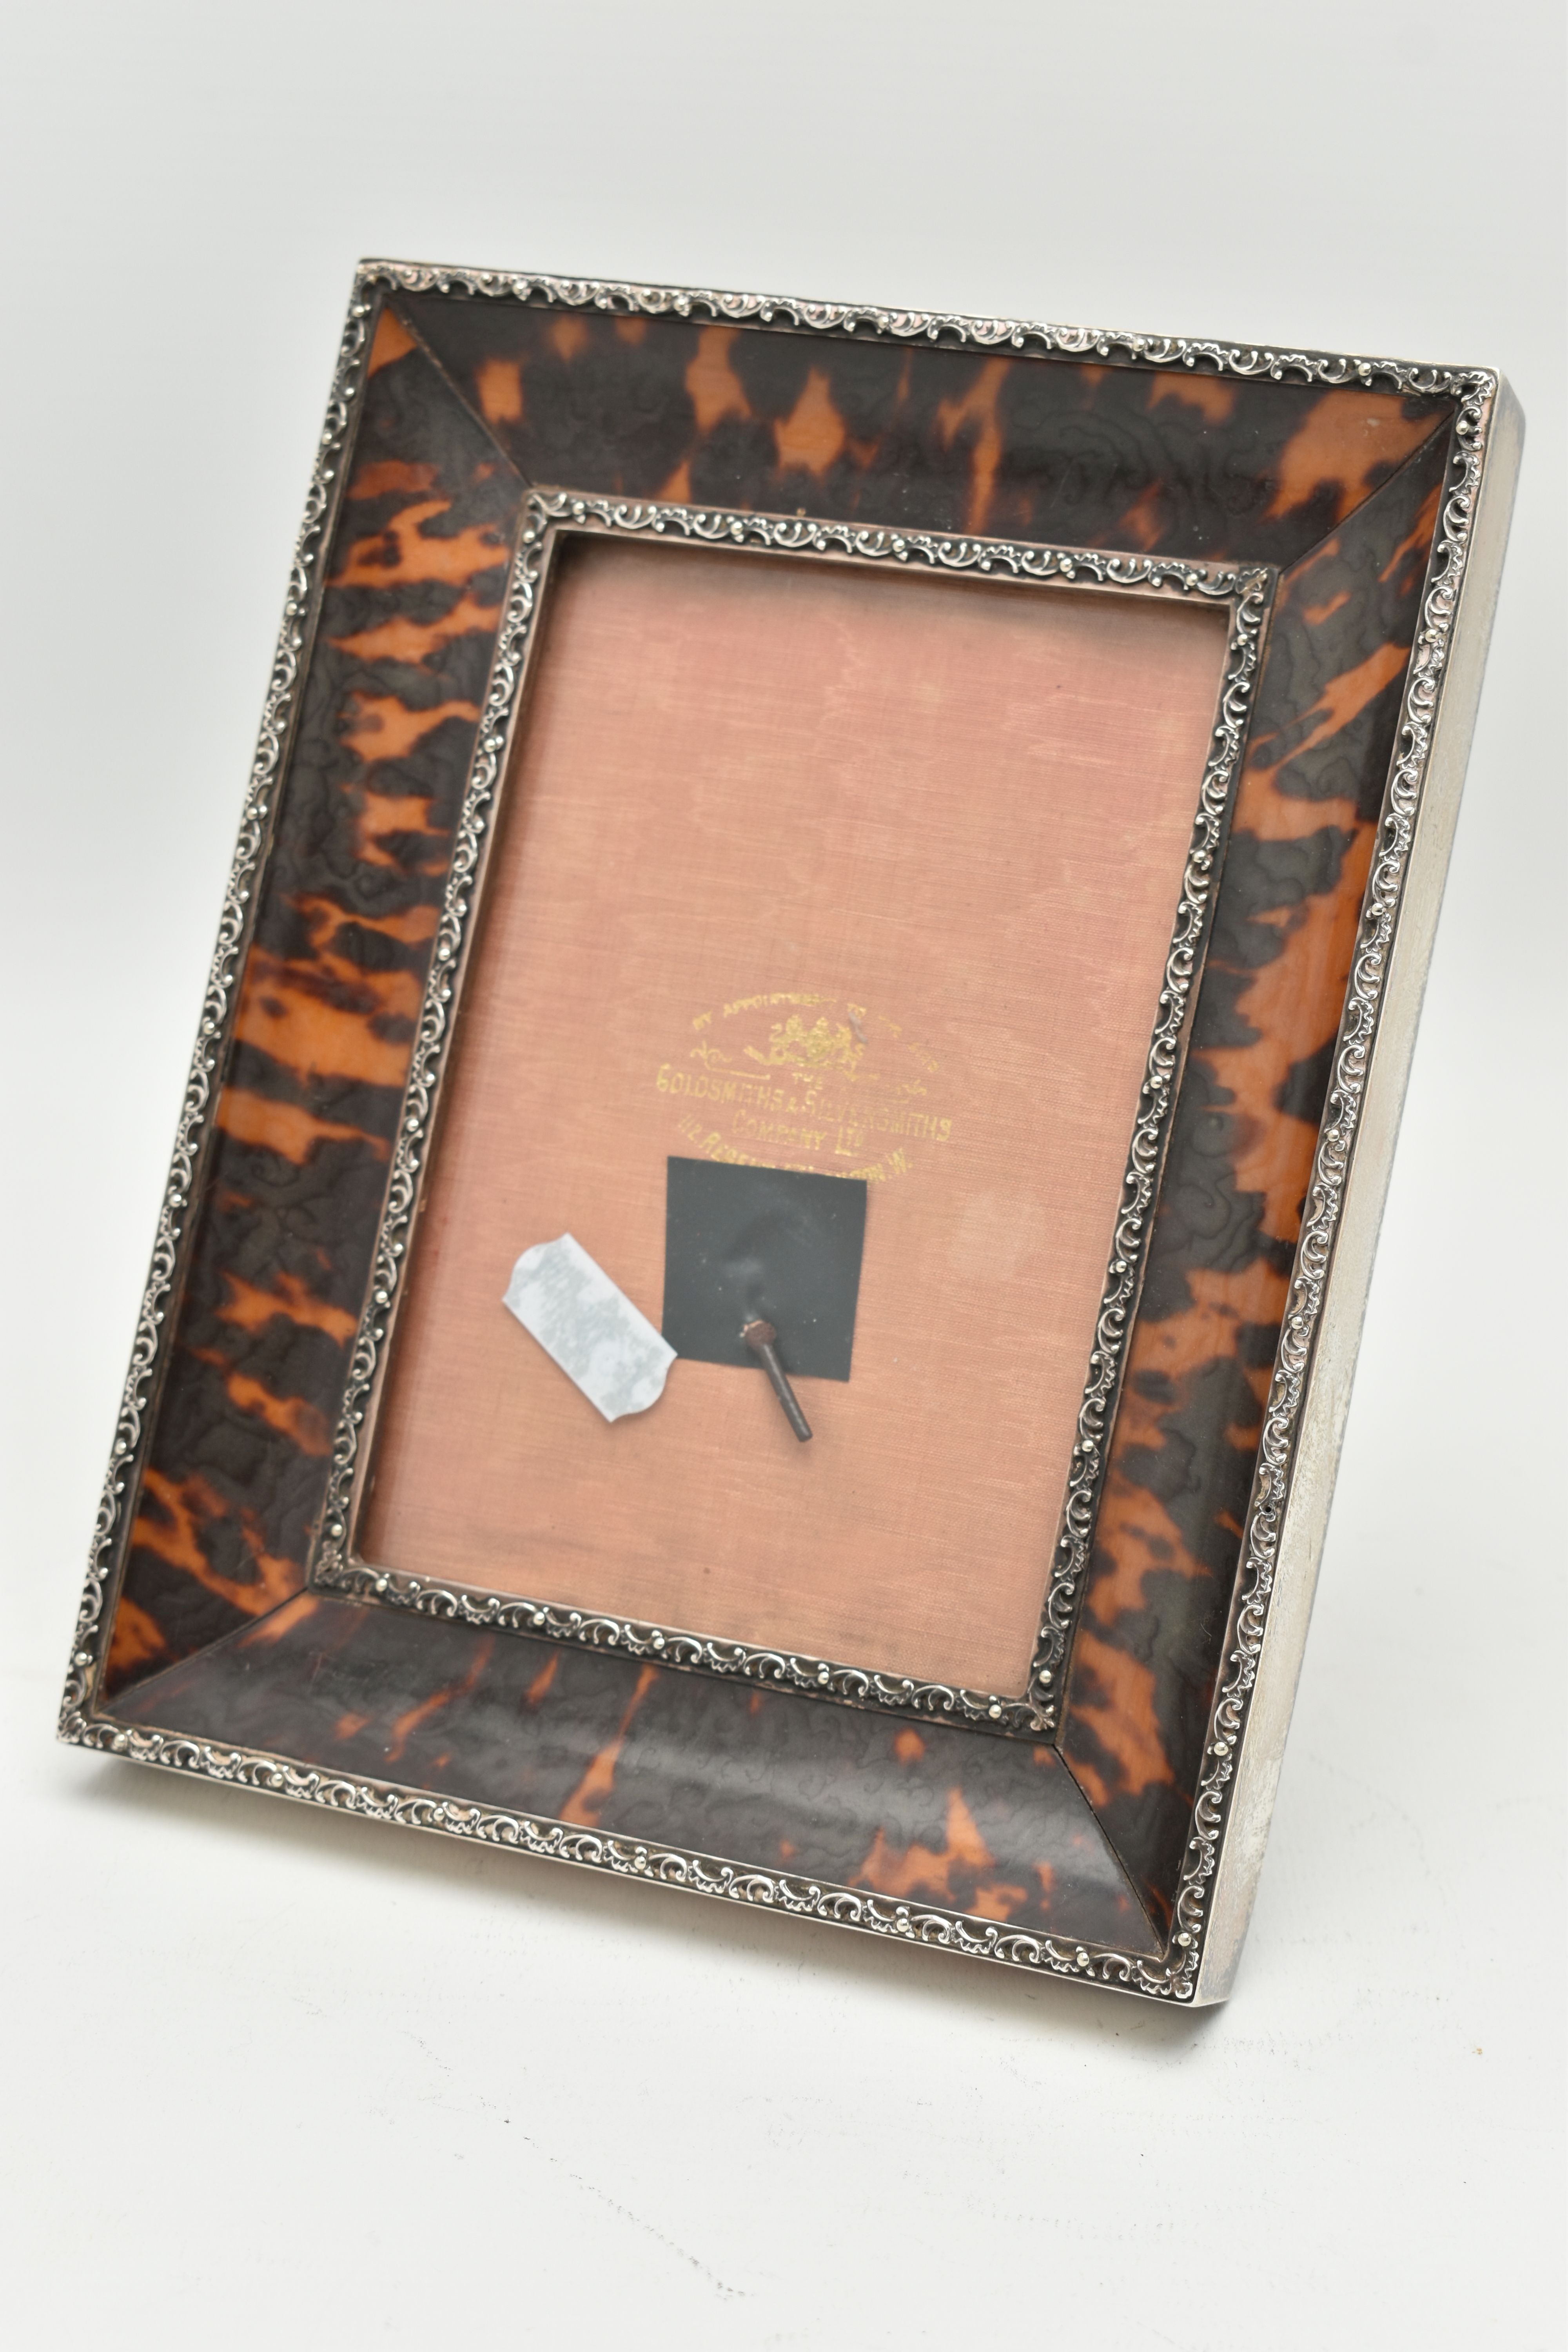 A GEORGE V PHOTO FRAME, a rectangular form photo frame, designed as silver foliage borders with